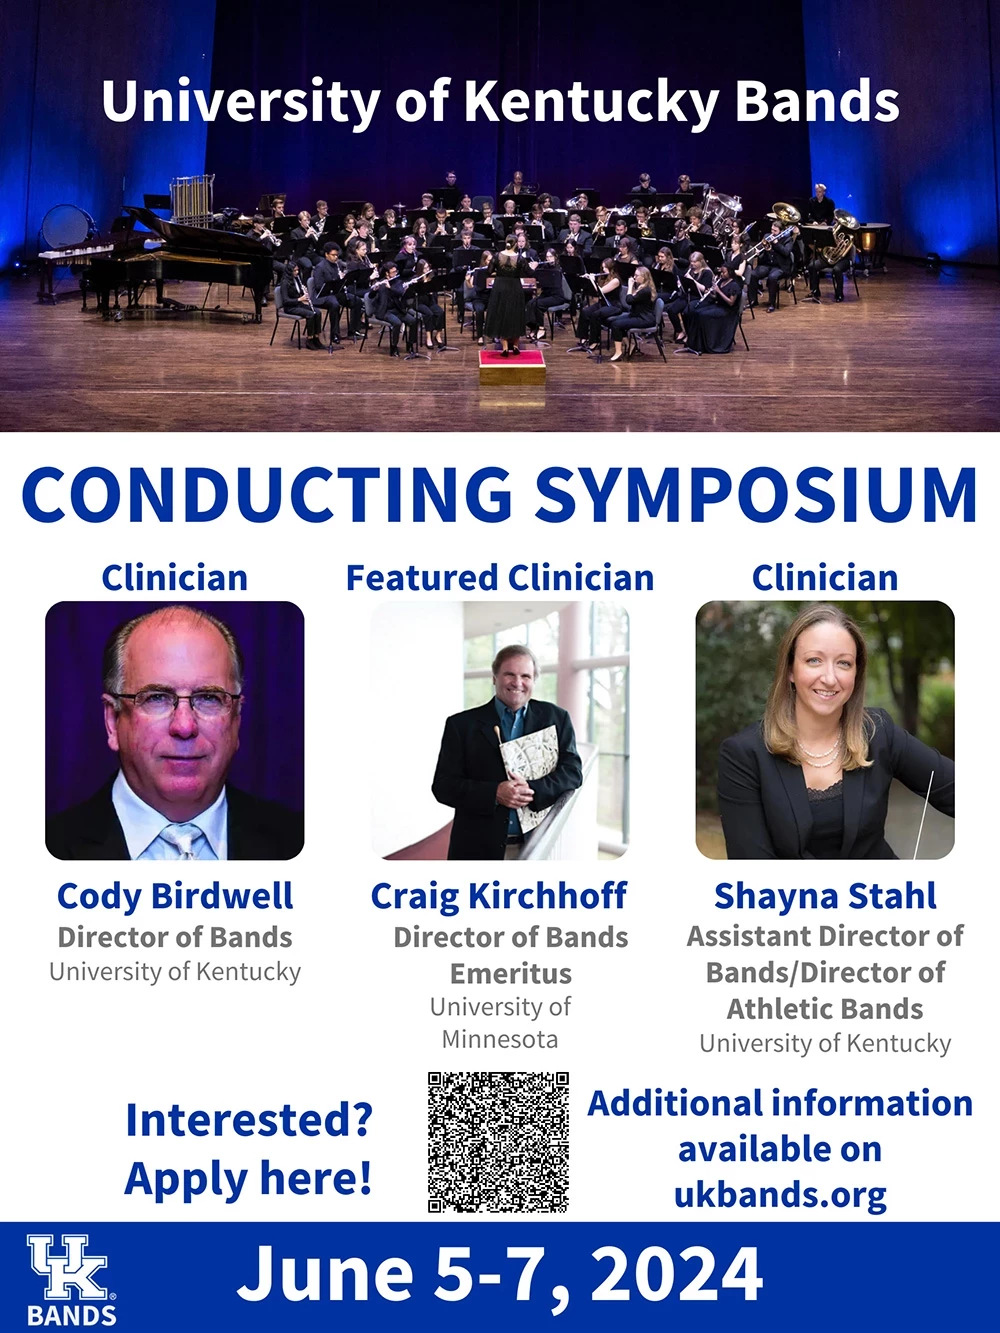 Poster for the 2024 Conducting Symposium, all details in the image are reproduced in text on the page.